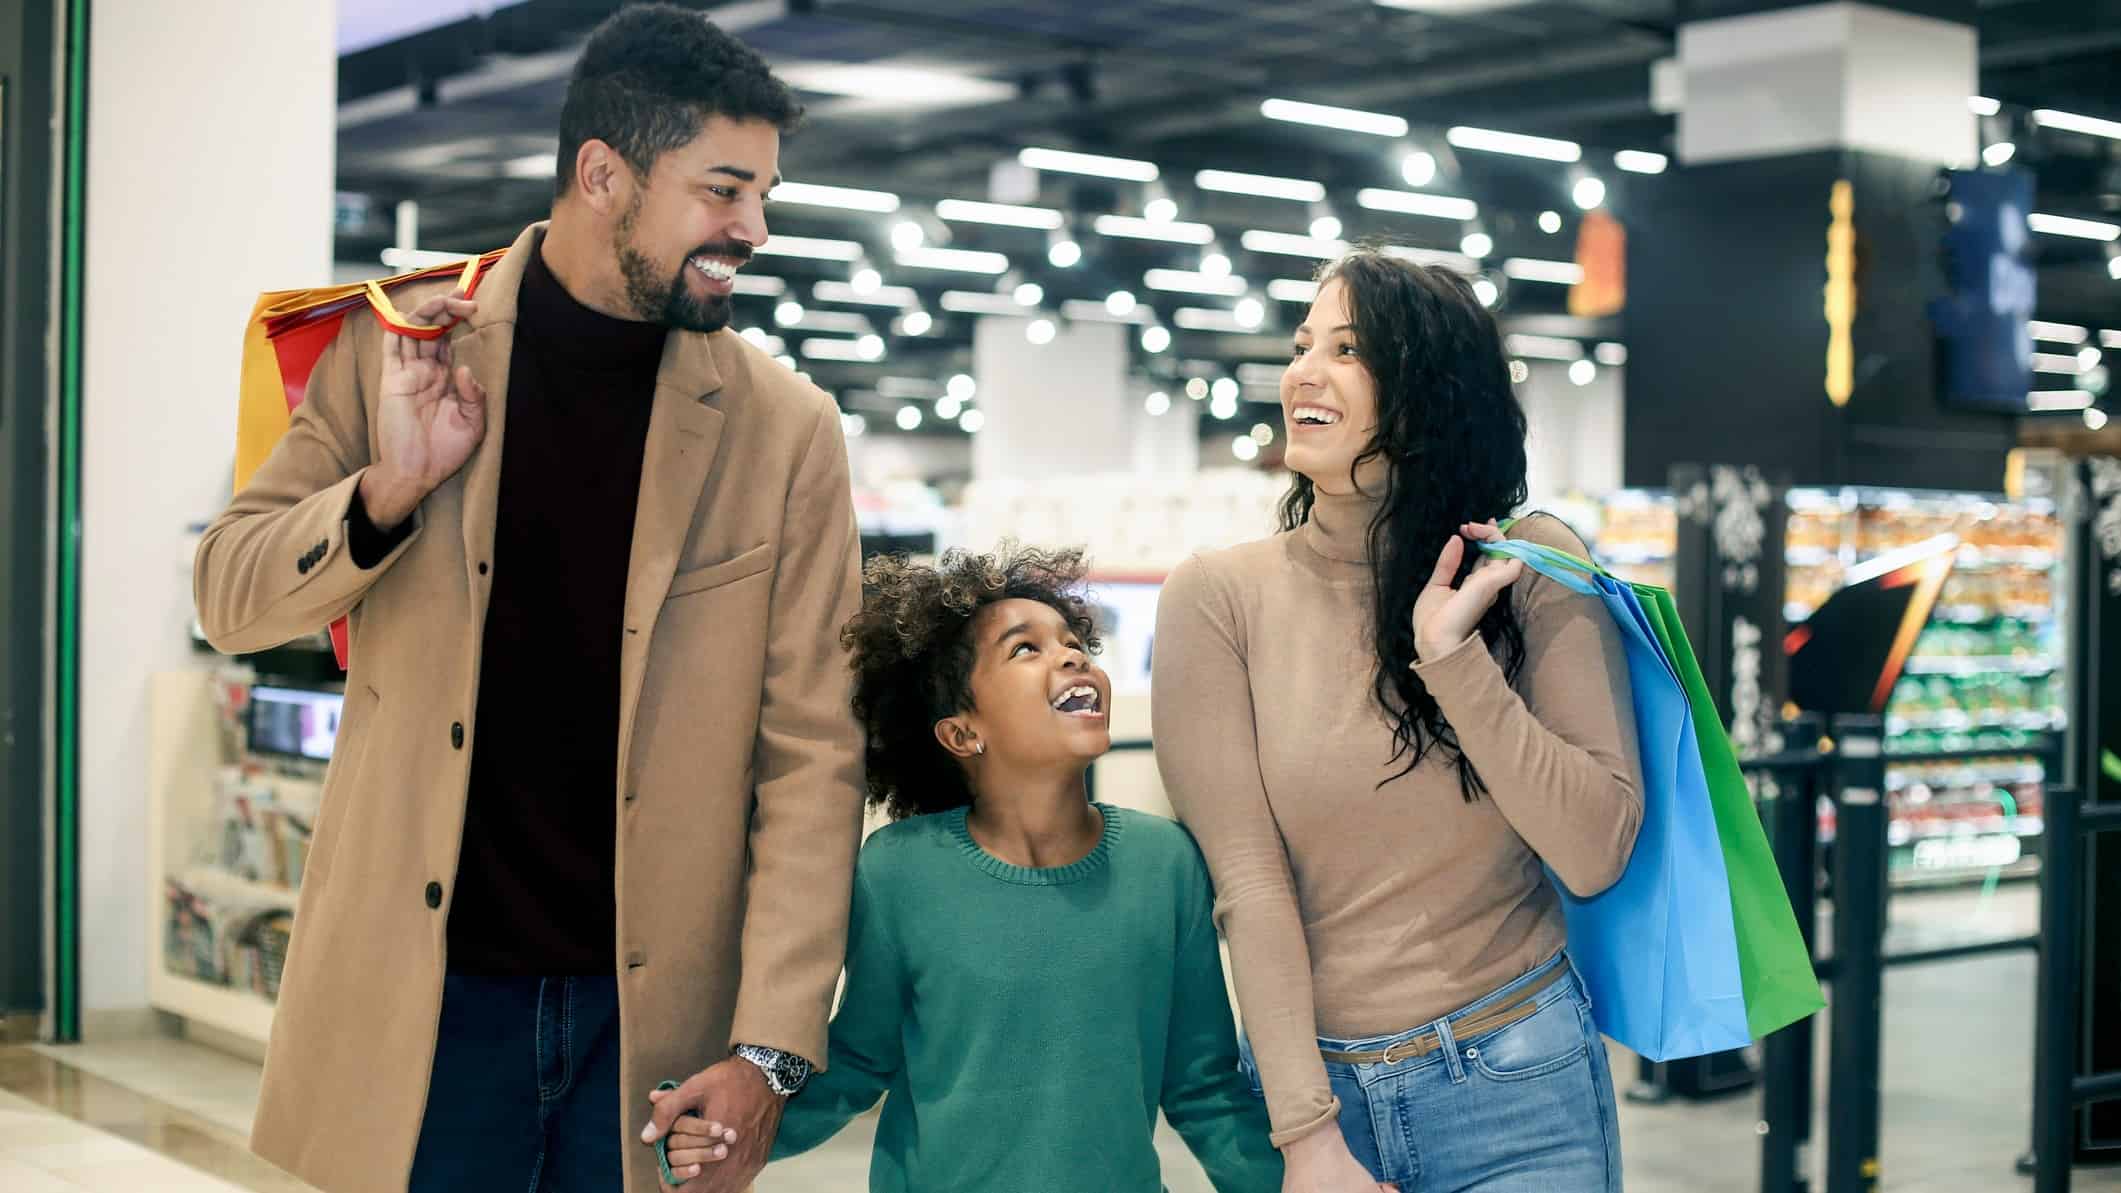 a family with shopping bags walks inside a shopping mall with shops in the background.